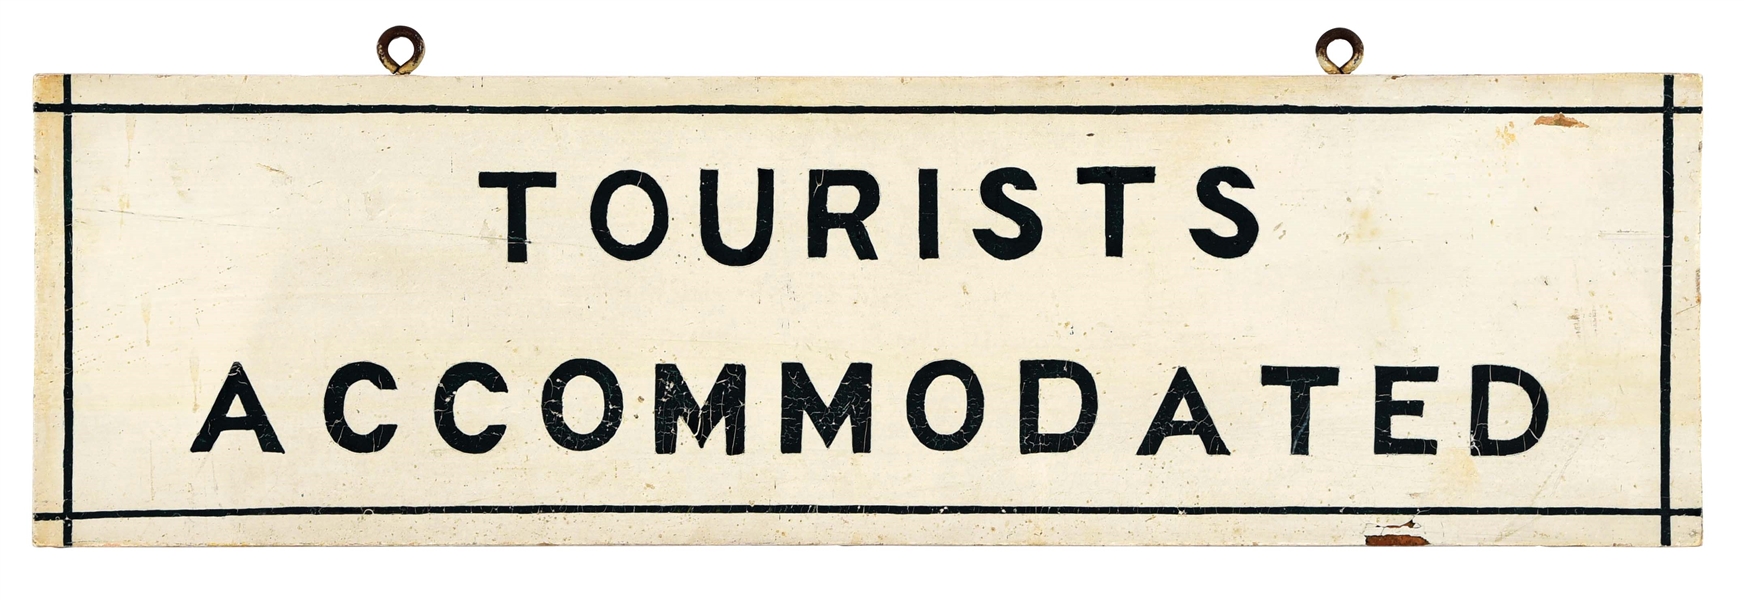 TOURISTS ACCOMMODATED HAND PAINTED WOOD ROADSIDE SIGN. 